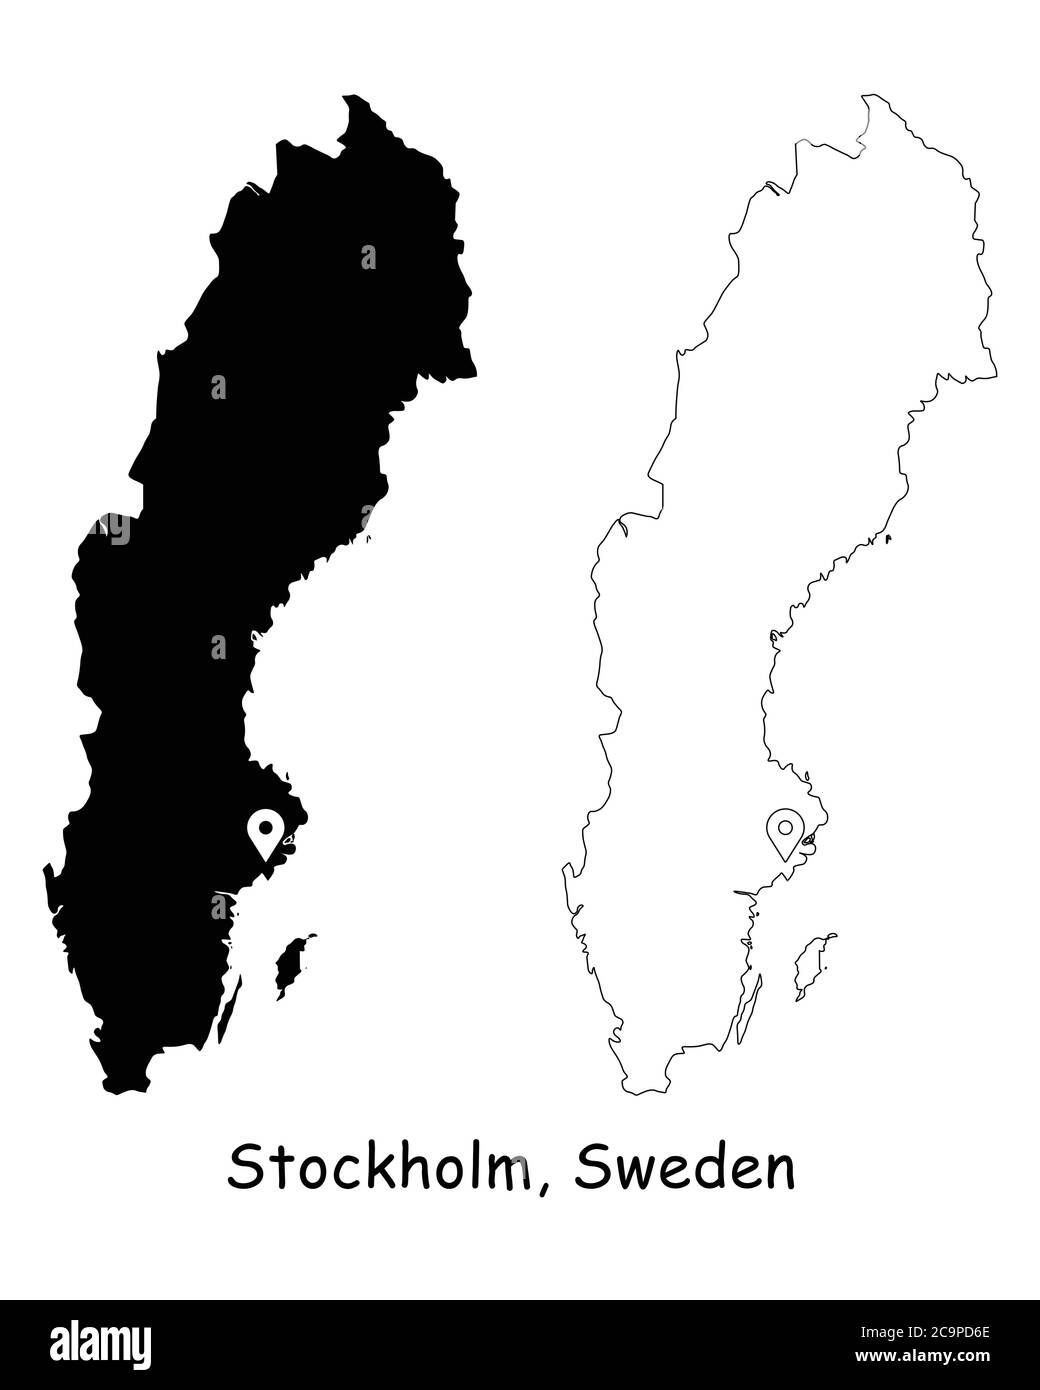 Stockholm, Sweden. Detailed Country Map with Location Pin on Capital City. Black silhouette and outline maps isolated on white background. EPS Vector Stock Vector